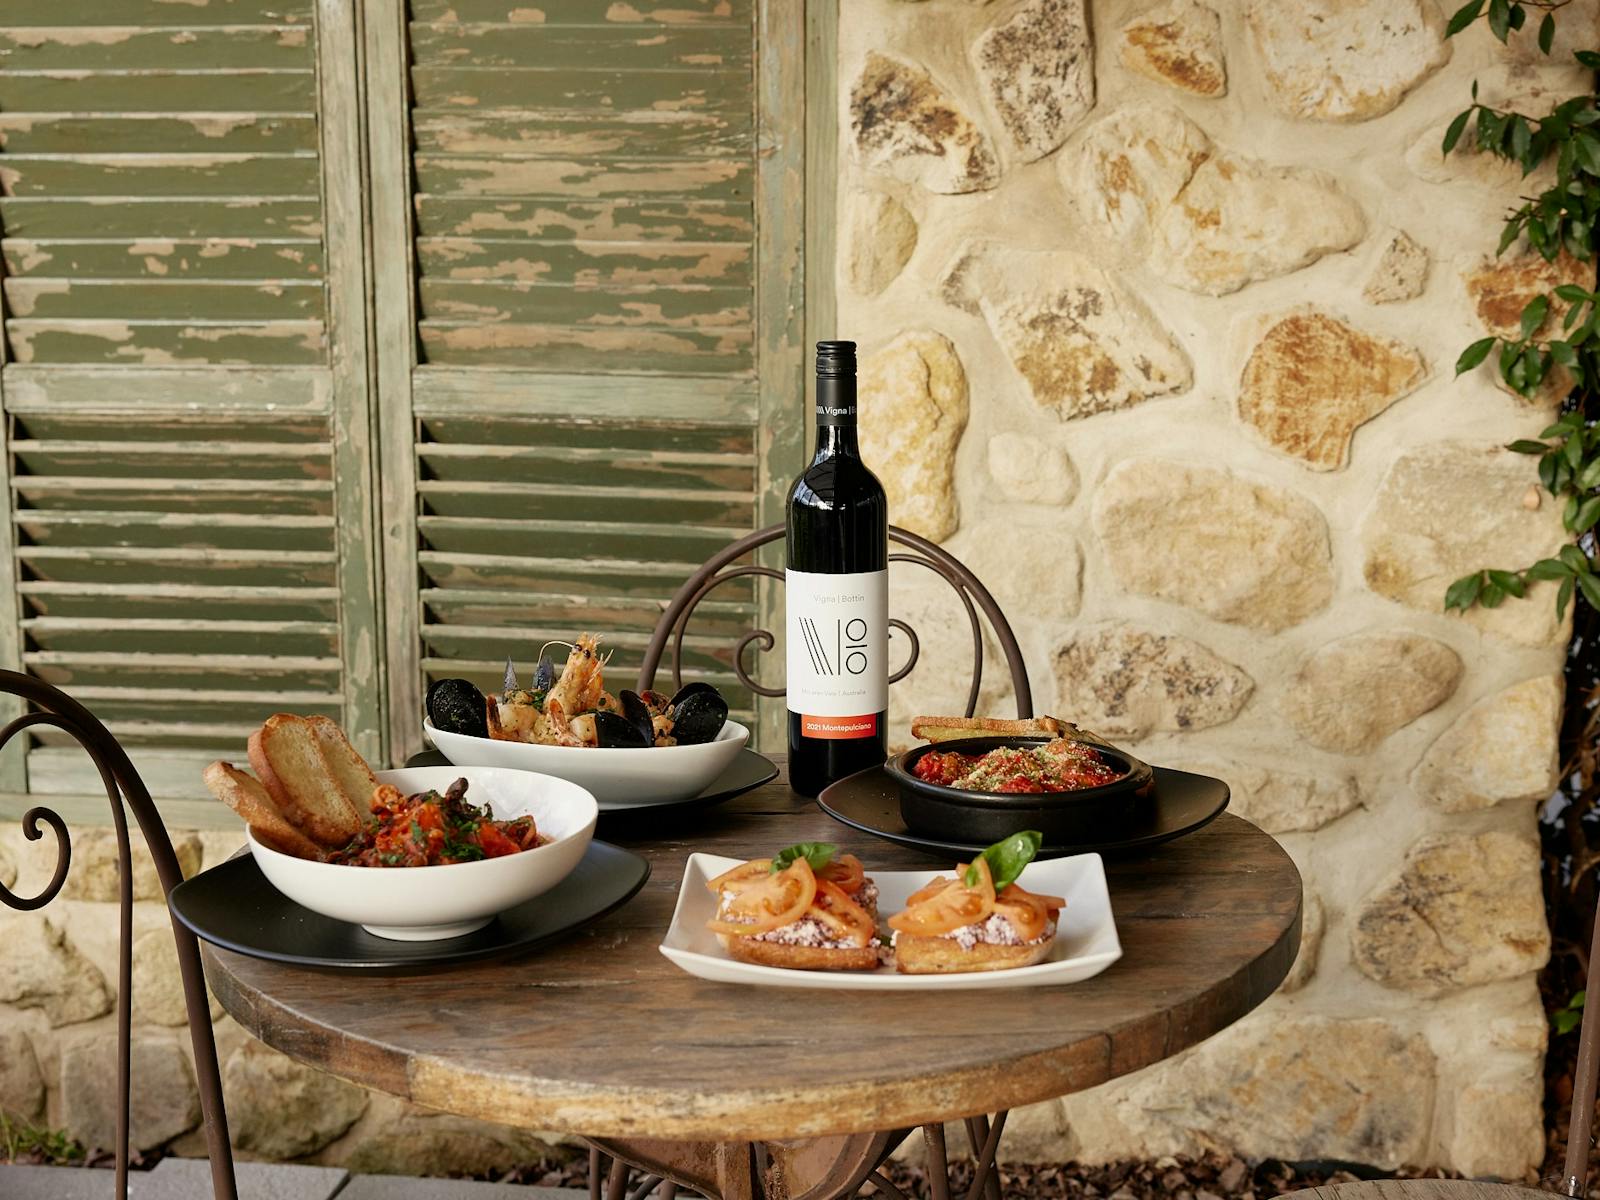 Image of various food and wine in front of stone wall